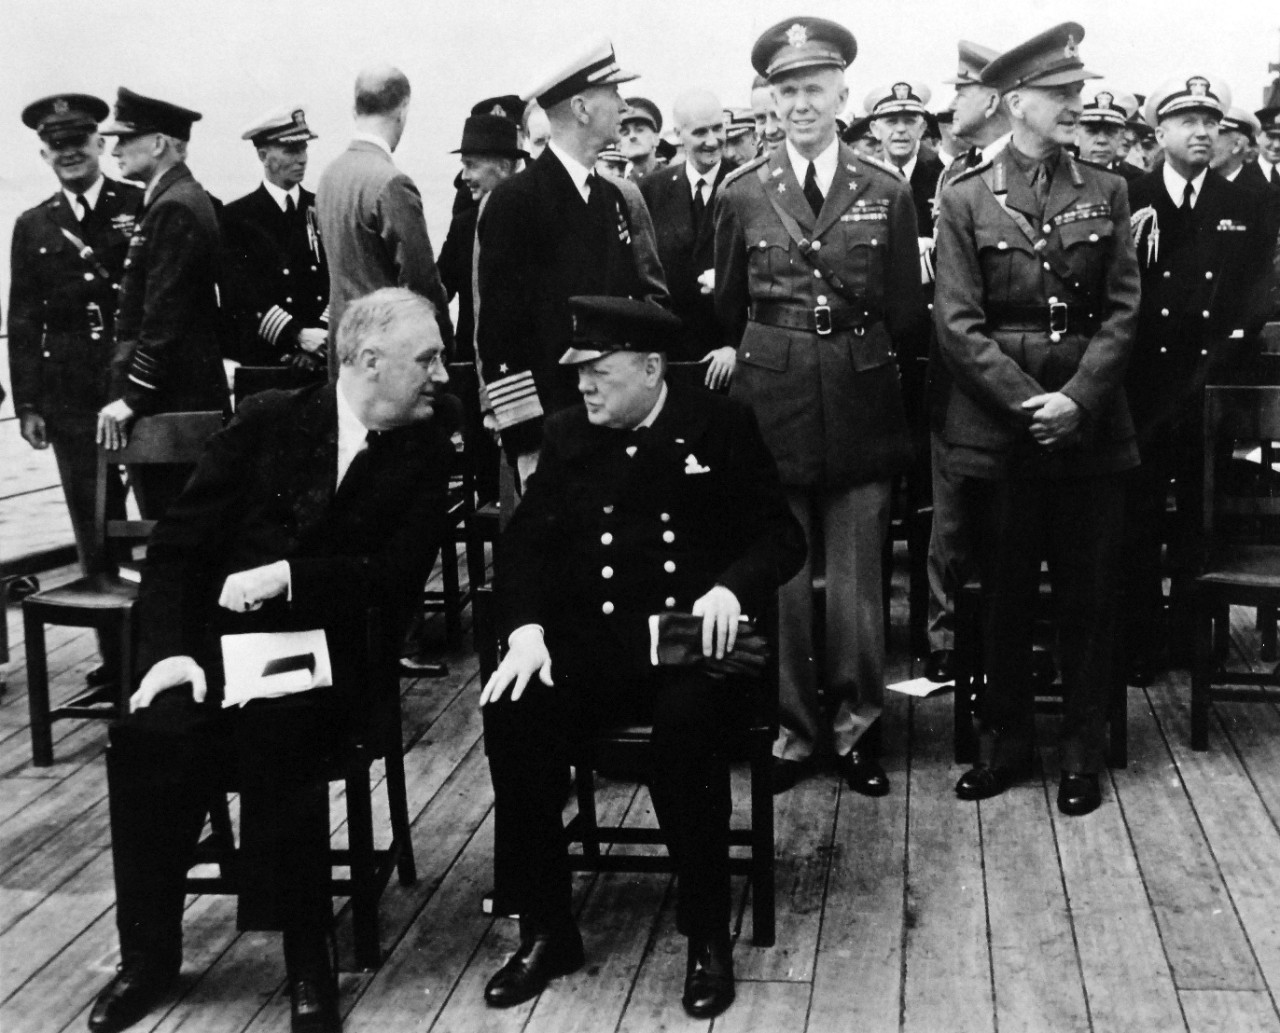 80-G-26863: Atlantic Charter, August 1941.  Informal group photograph including President Franklin D. Roosevelt and Prime Minister Winston S. Churchill on deck of HMS Prince of Wales following church services during the Atlantic Charter.  Photograph released August 1941.   Official U.S. Navy Photograph, now in the collections of the National Archives.  (2016/03/22).